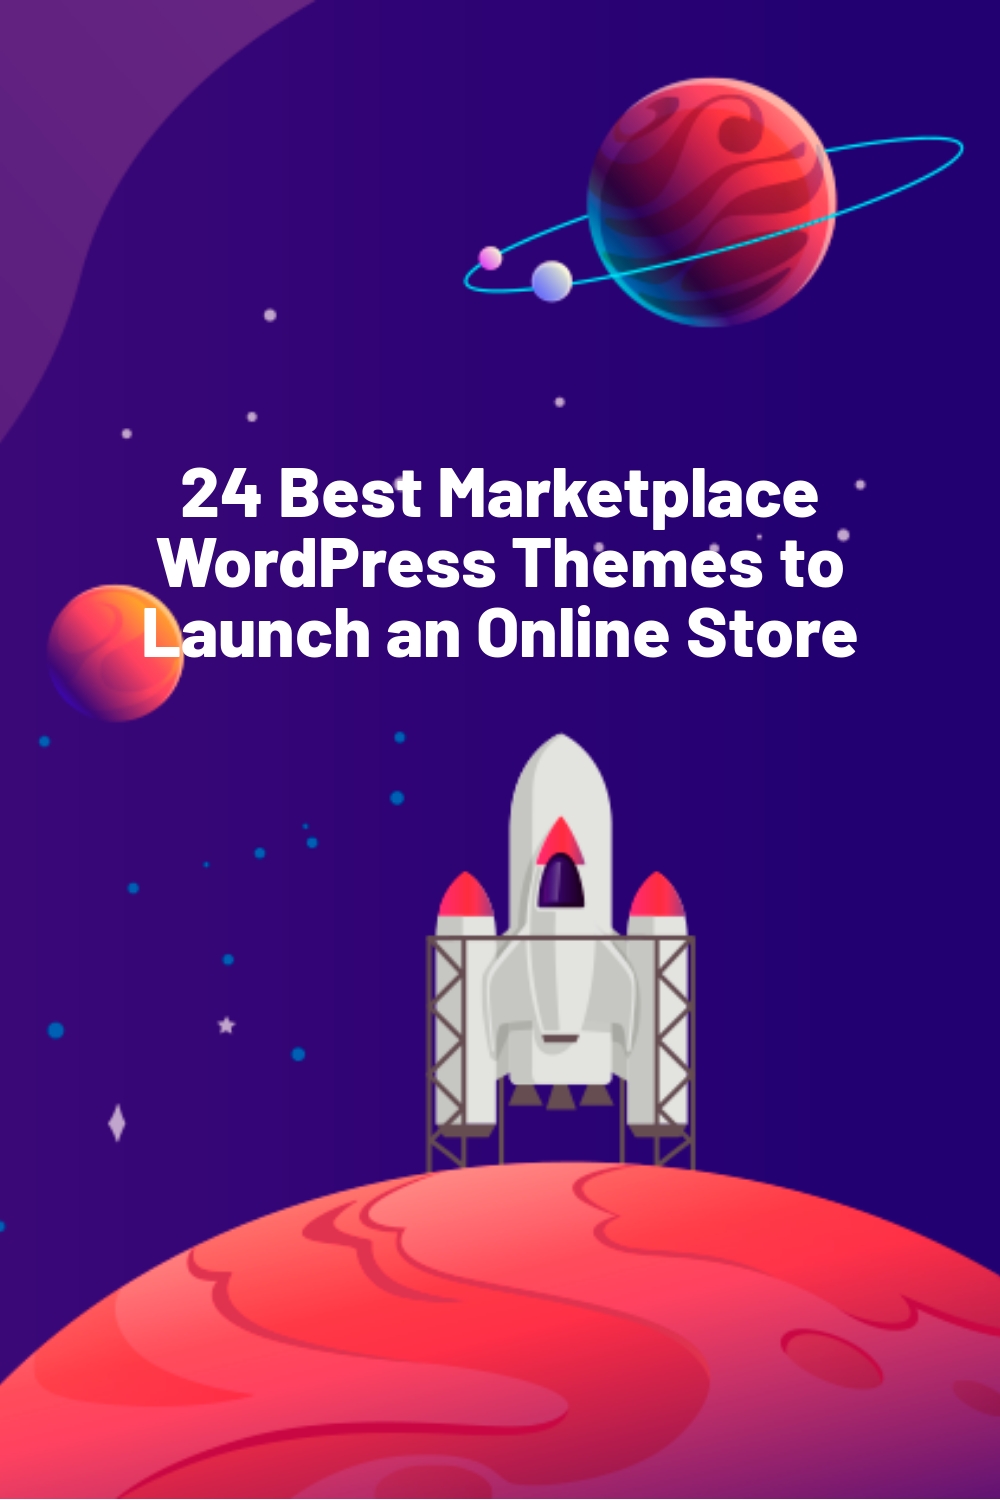 24 Best Marketplace WordPress Themes to Launch an Online Store